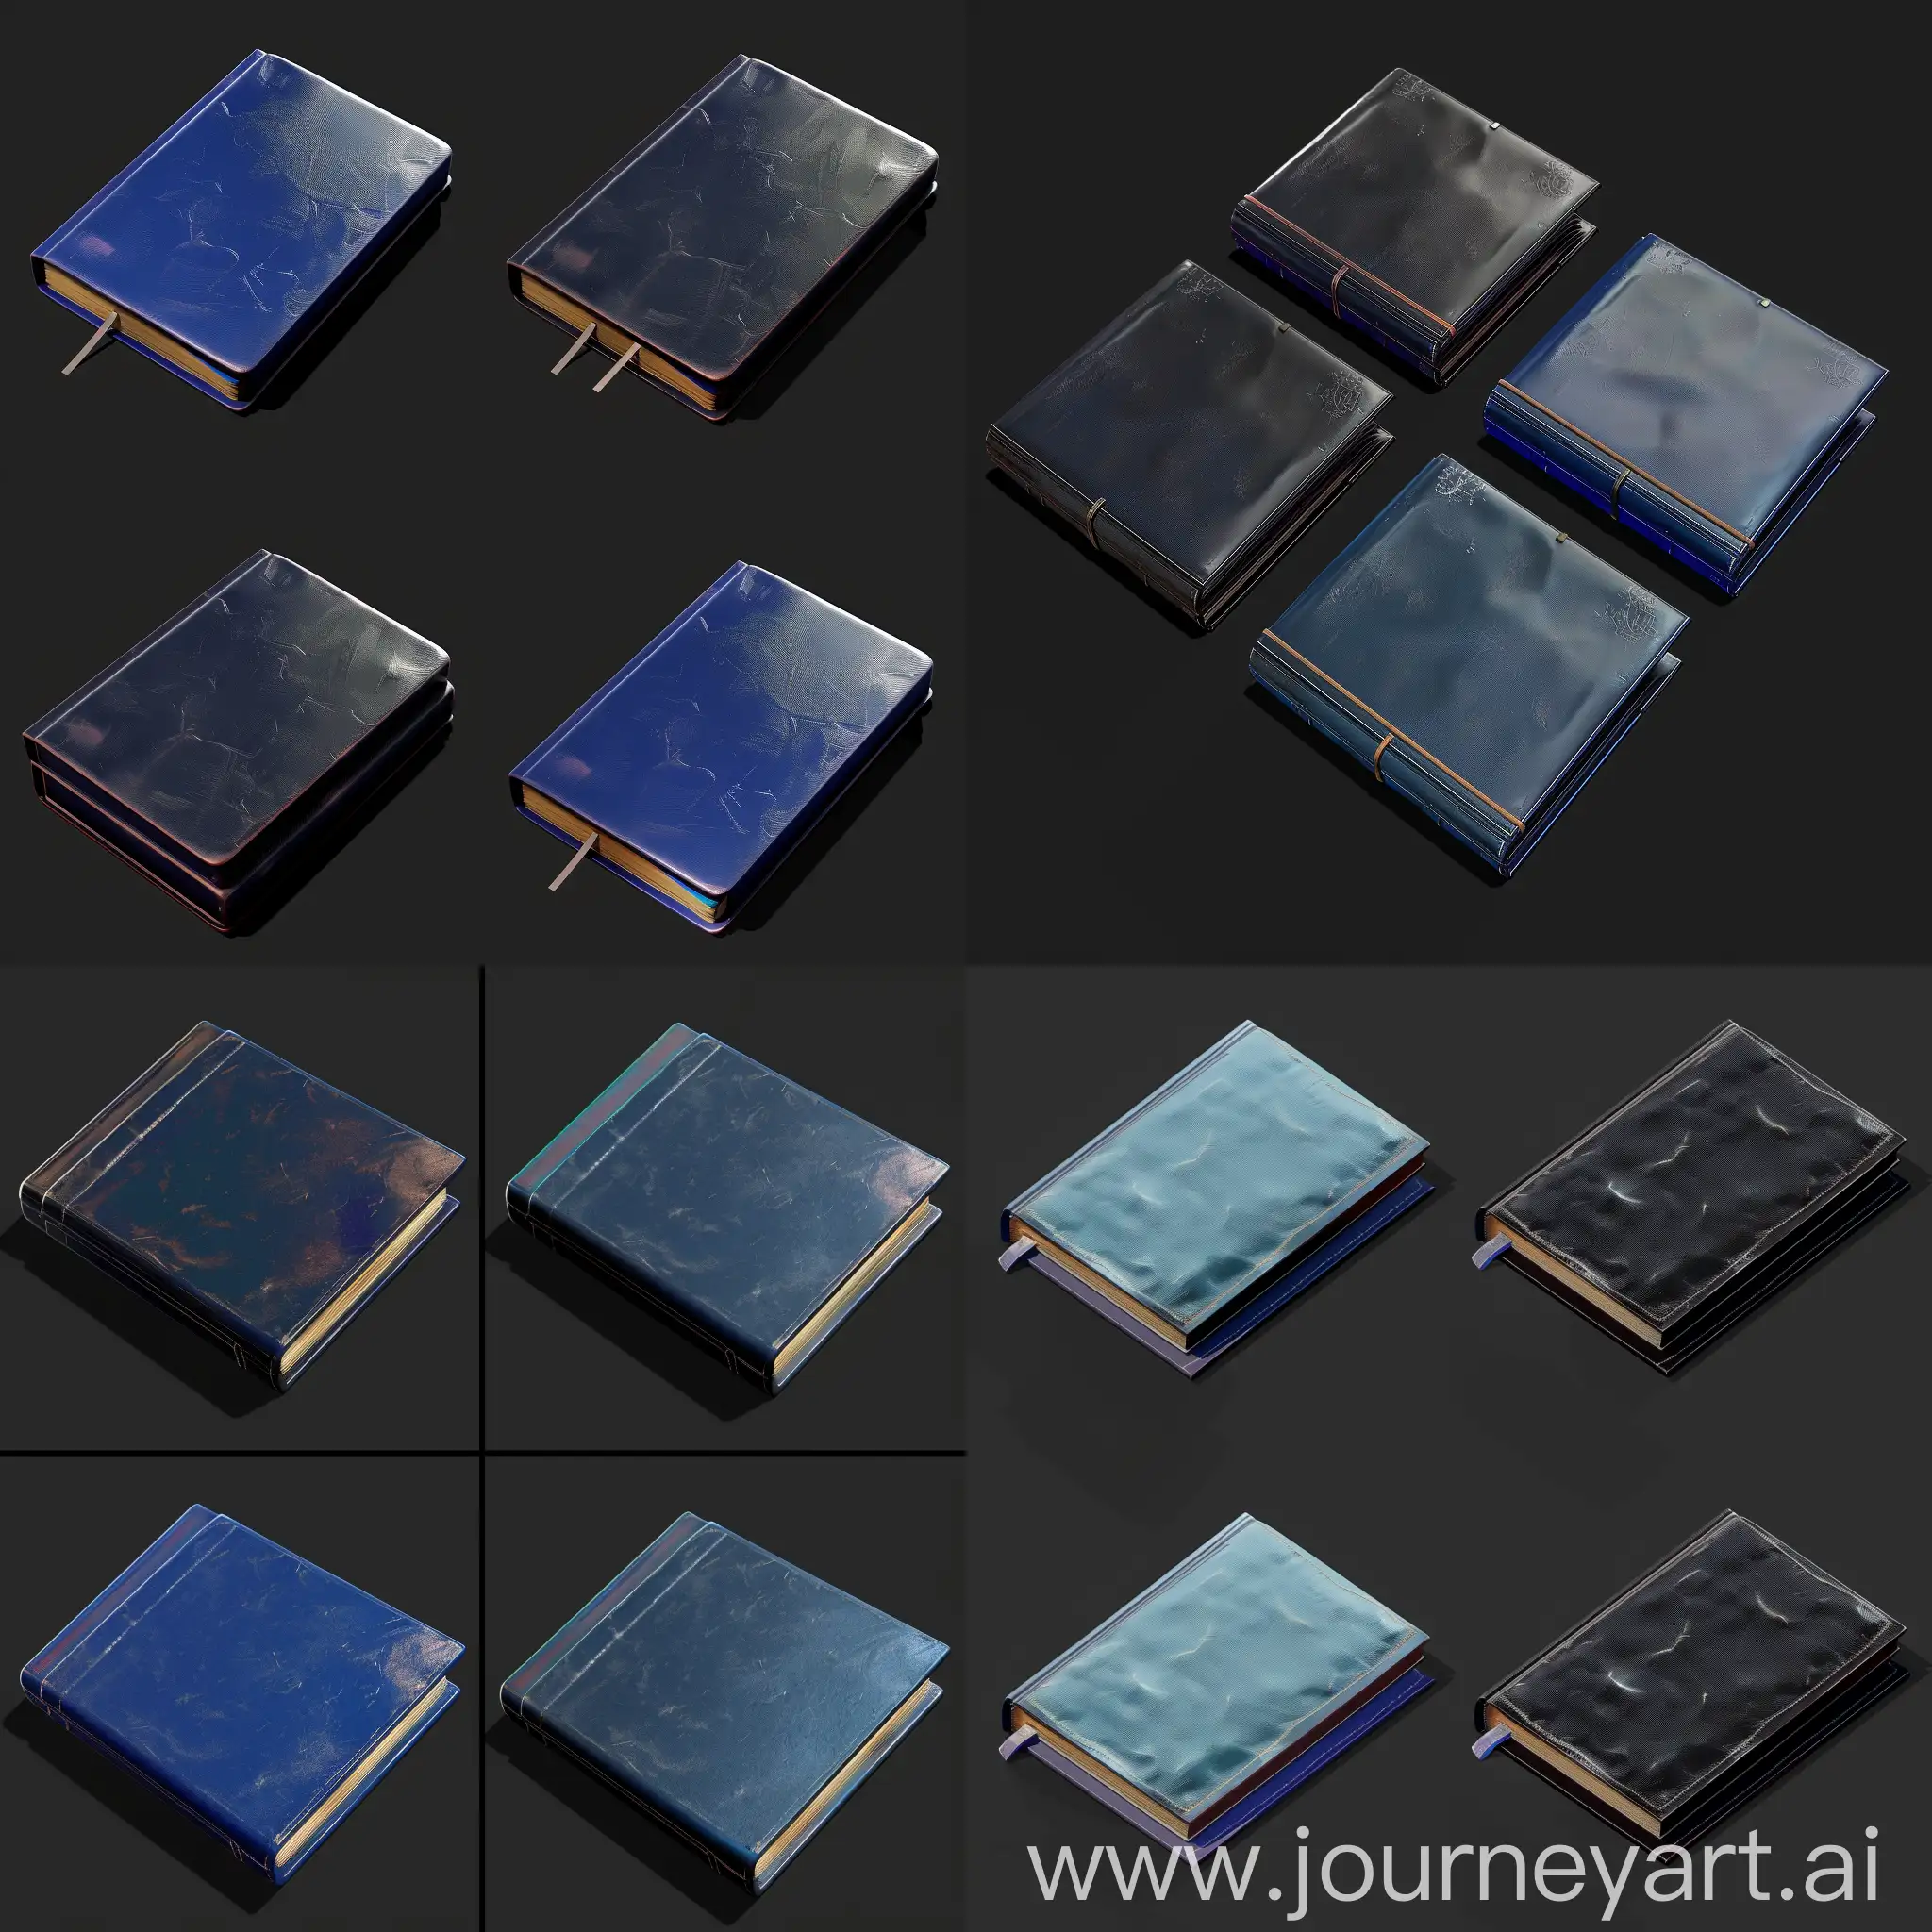 Ultrarealistic-Isometric-Blue-Journals-on-Black-Background